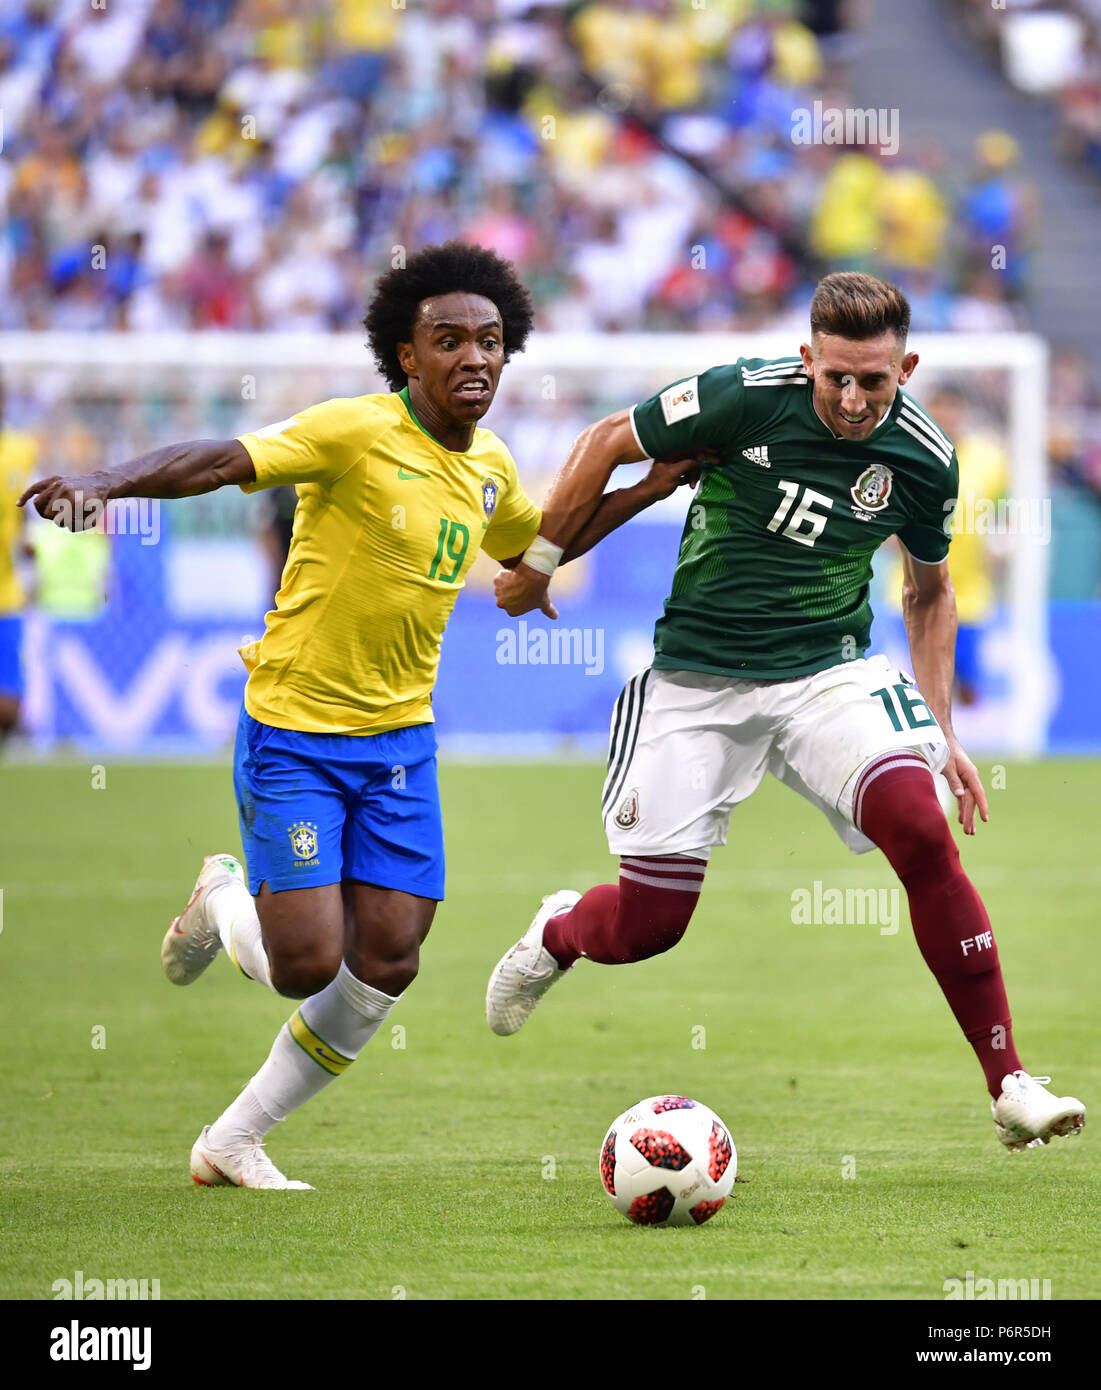 Samara, Russia. 2nd July, 2018. Willian (L) of Brazil vies with Hector Herrera of Mexico during the 2018 FIFA World Cup round of 16 match between Brazil and Mexico in Samara, Russia, July 2, 2018. Credit: Chen Yichen/Xinhua/Alamy Live News Stock Photo